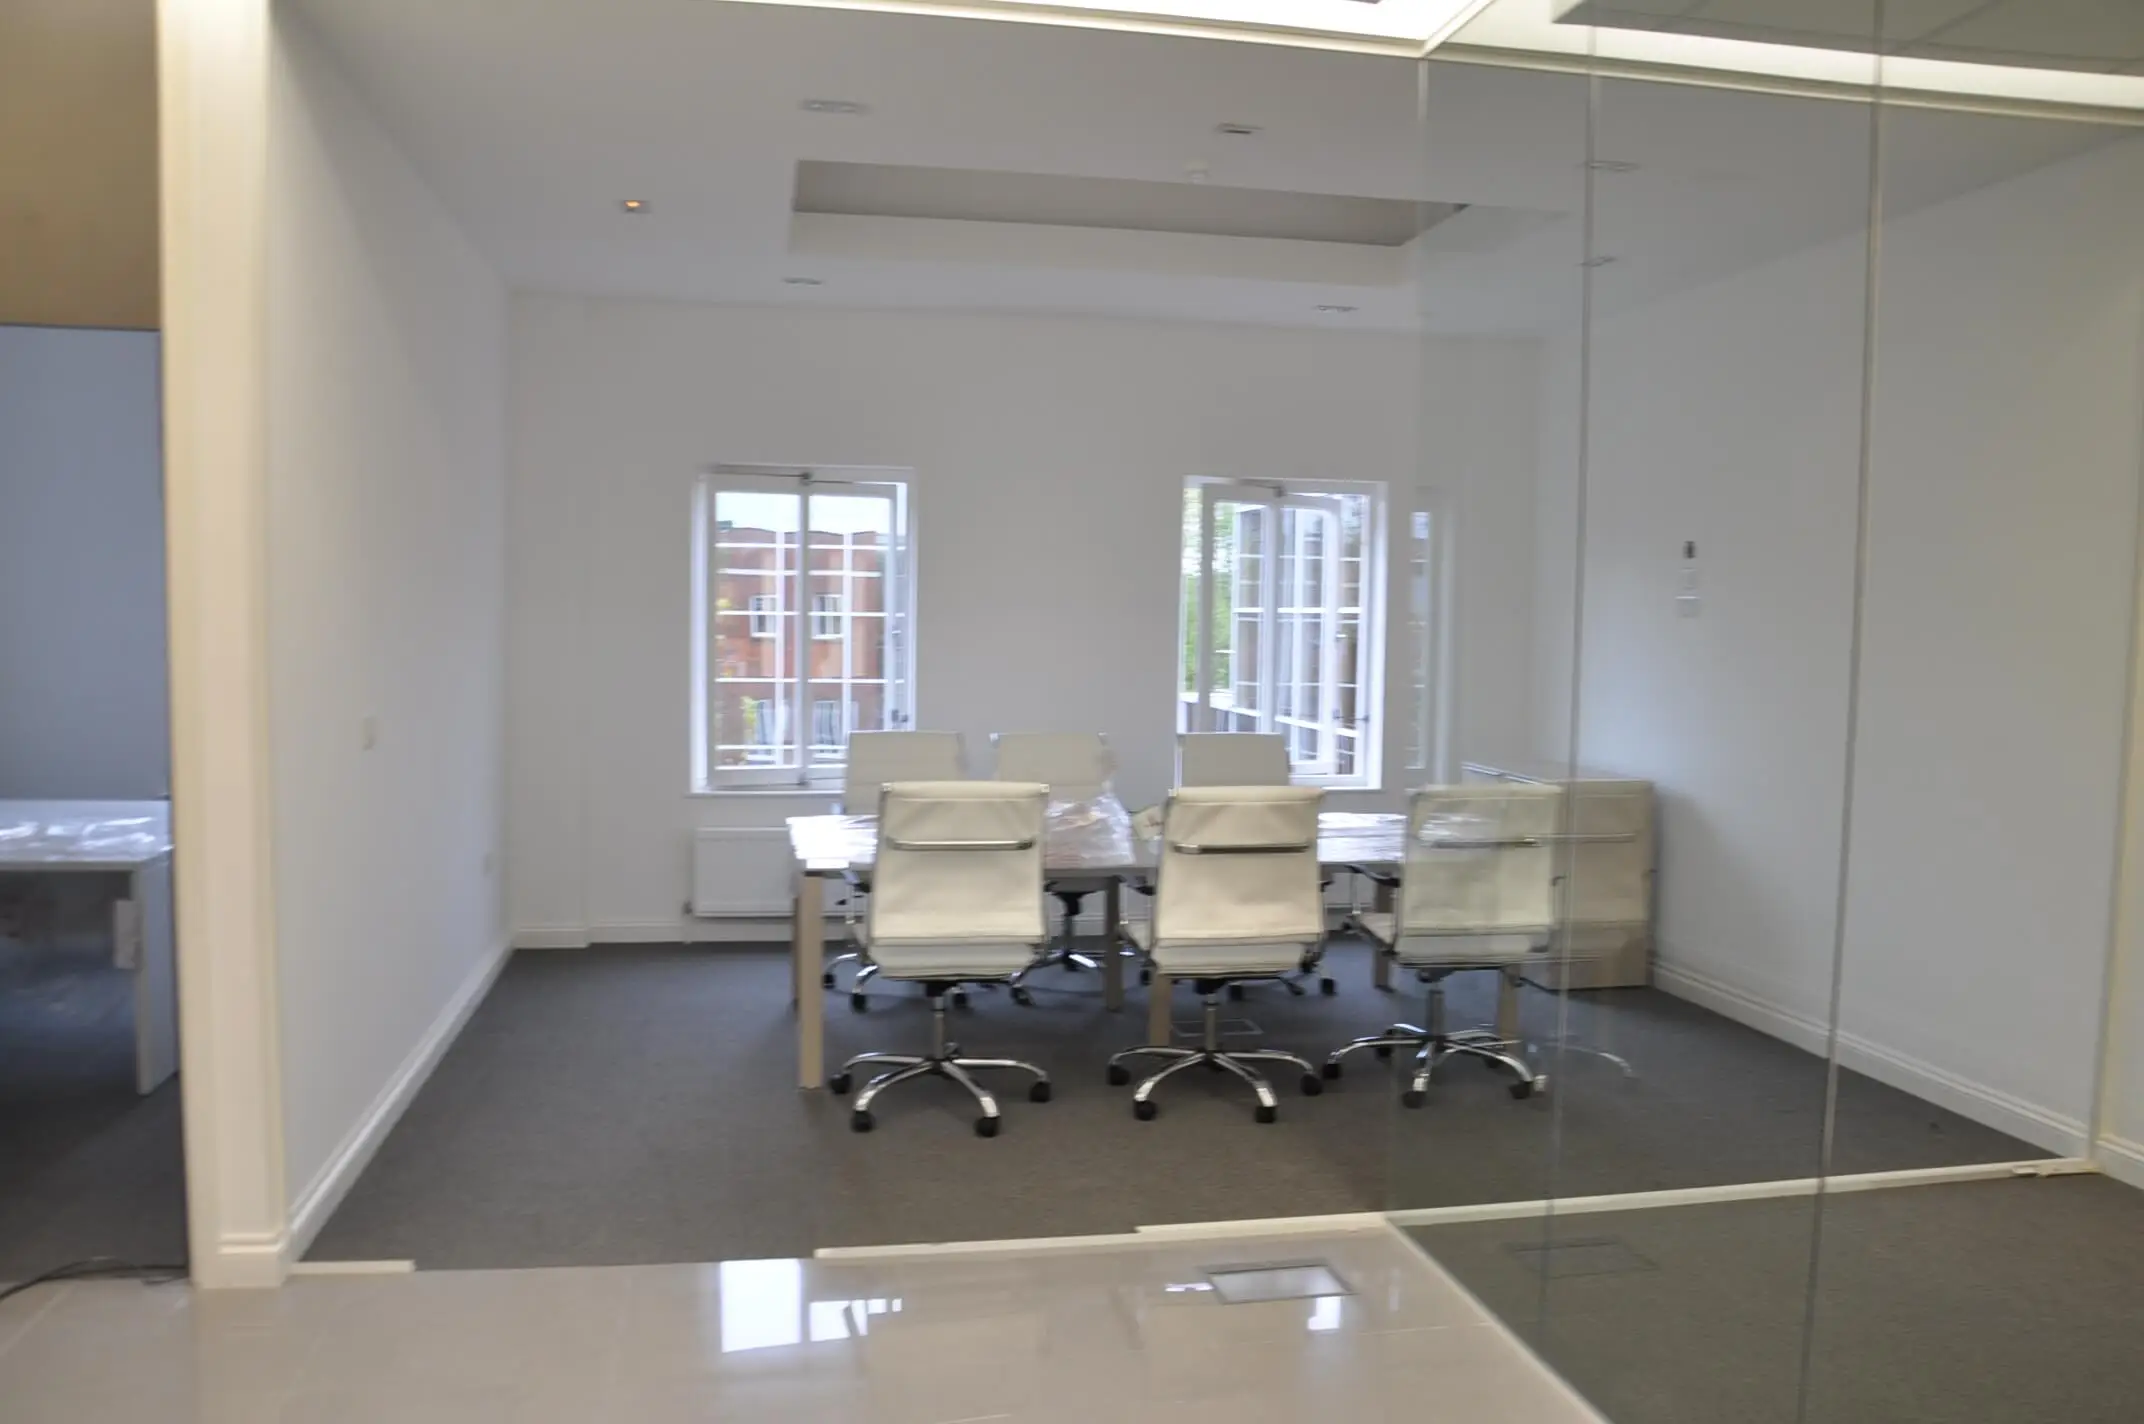 Meeting area with table white chairs and frameless glass partitions